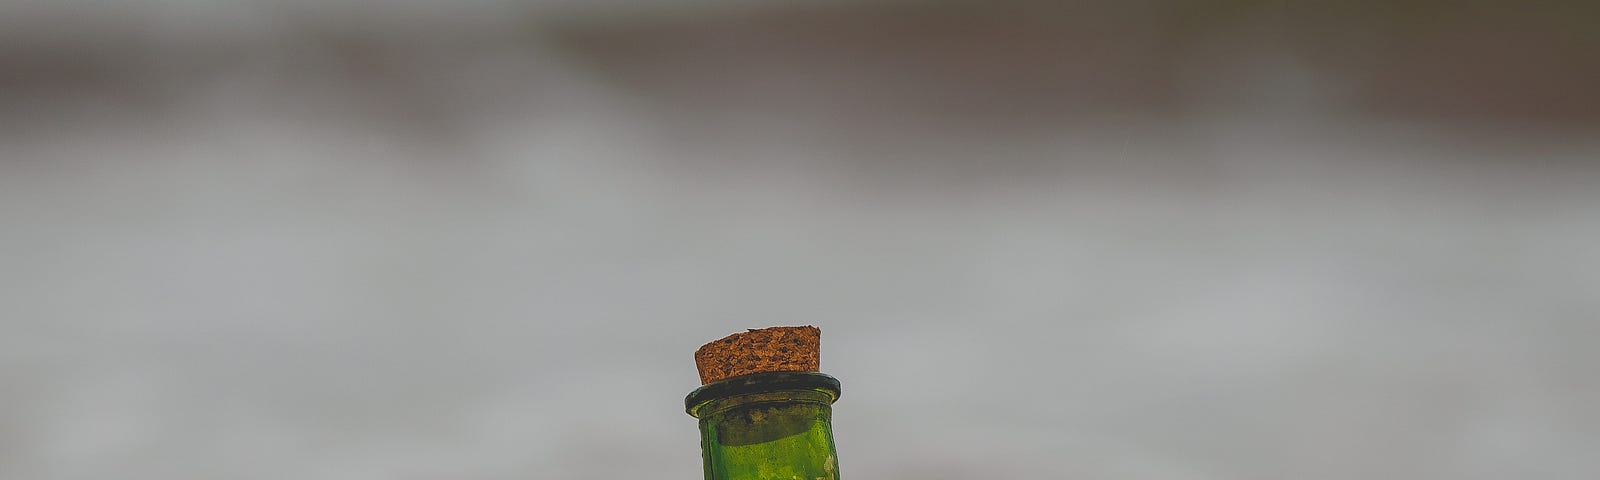 a green bottle washed on shore